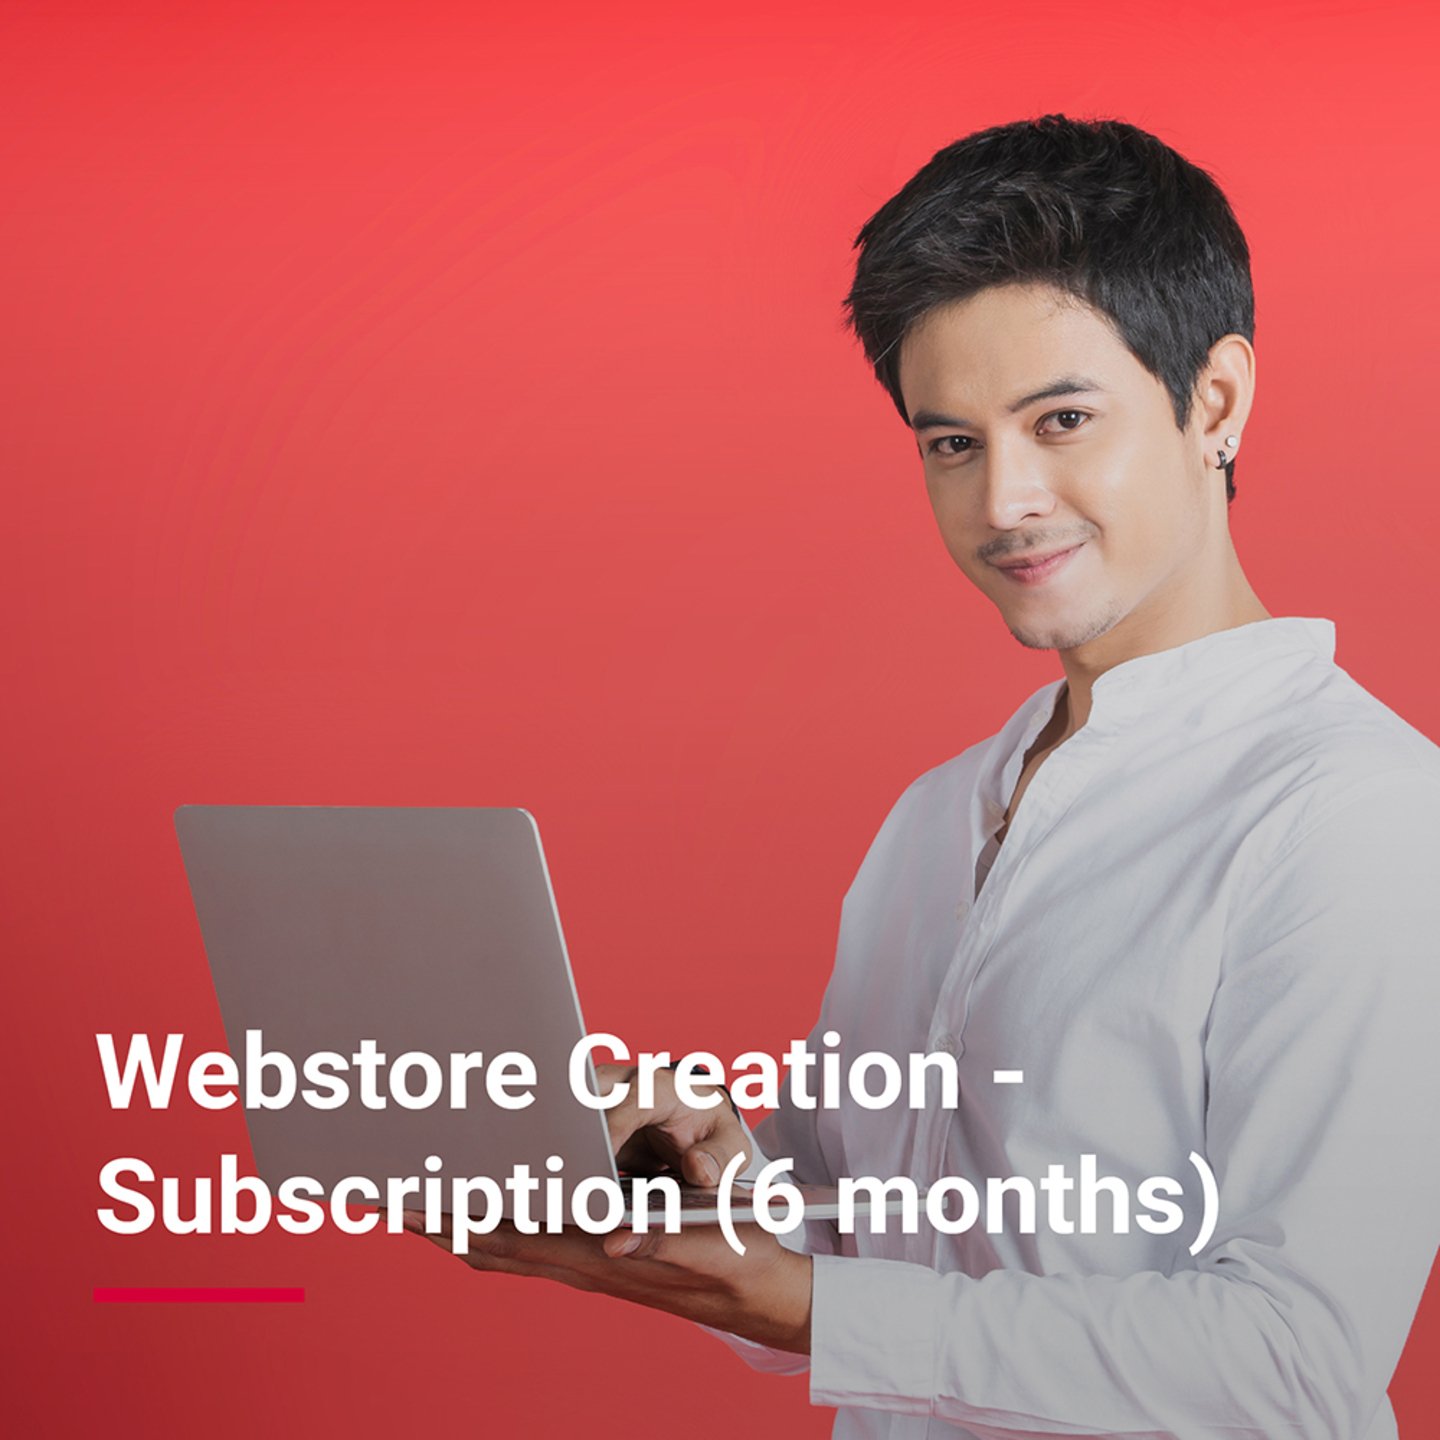 Webstore Creation - Subscription (6 months)